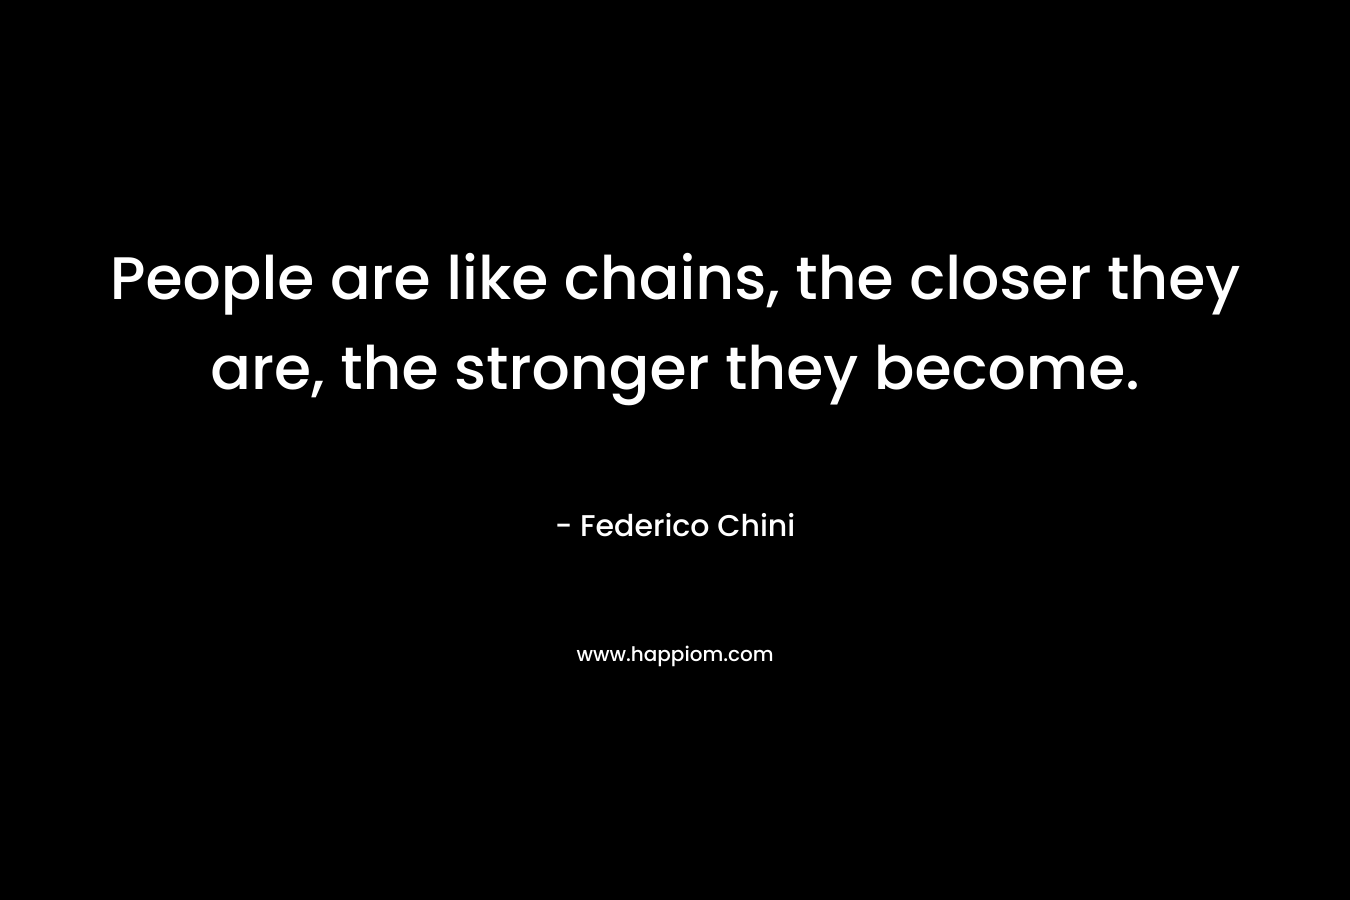 People are like chains, the closer they are, the stronger they become. – Federico Chini